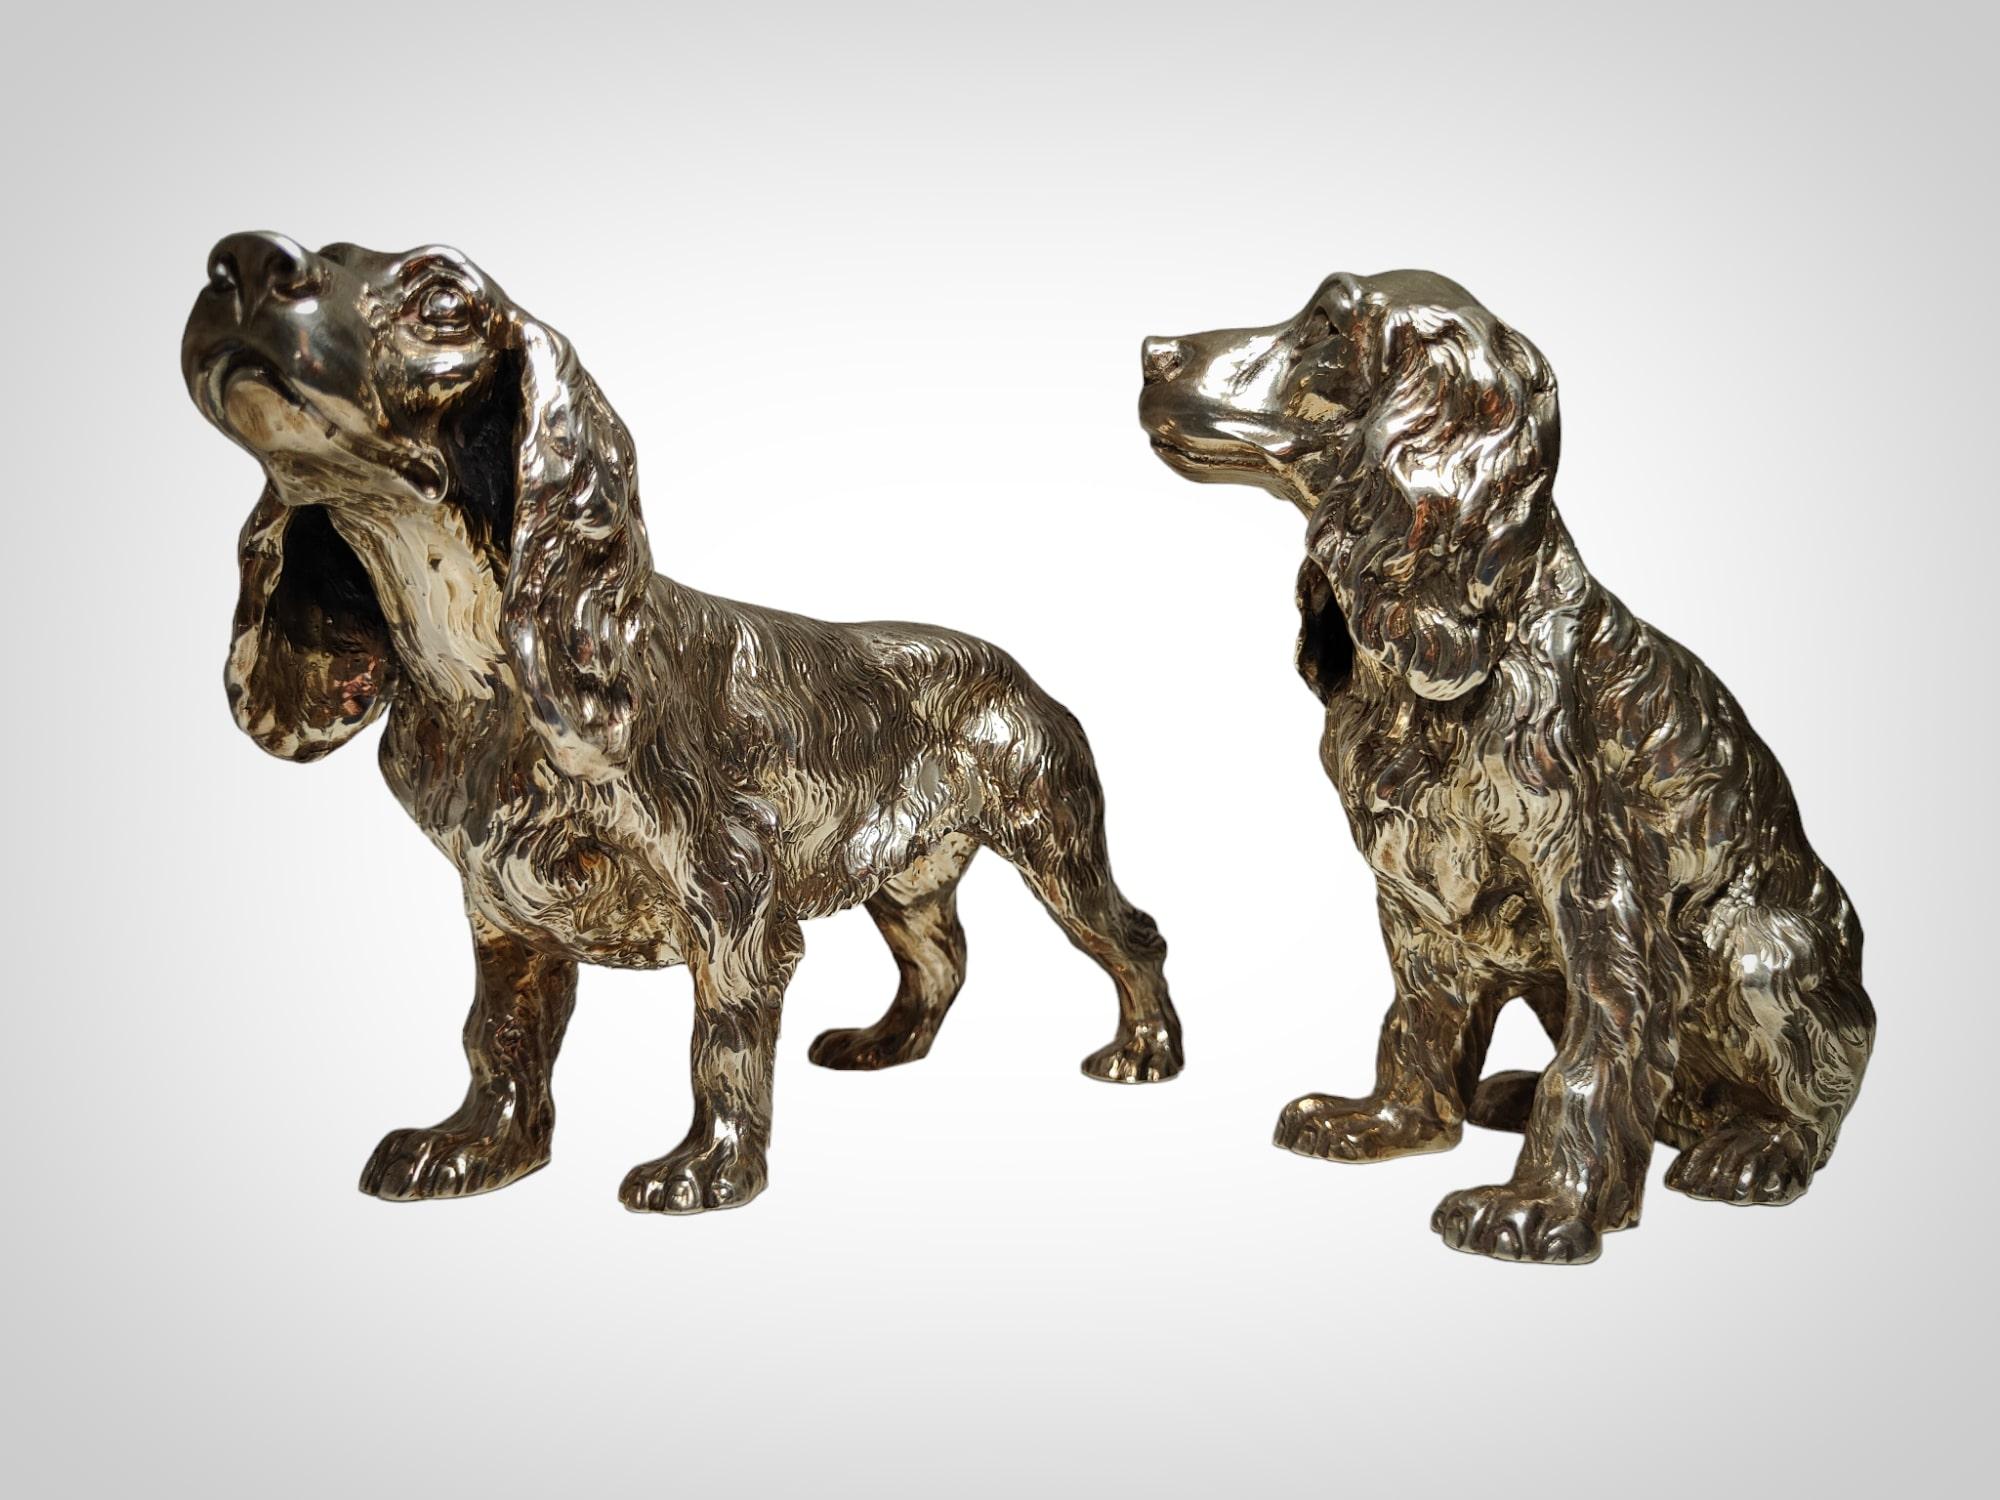 Exquisite Pair of Italian Solid Silver Cocker Spaniel Dogs For Sale 9